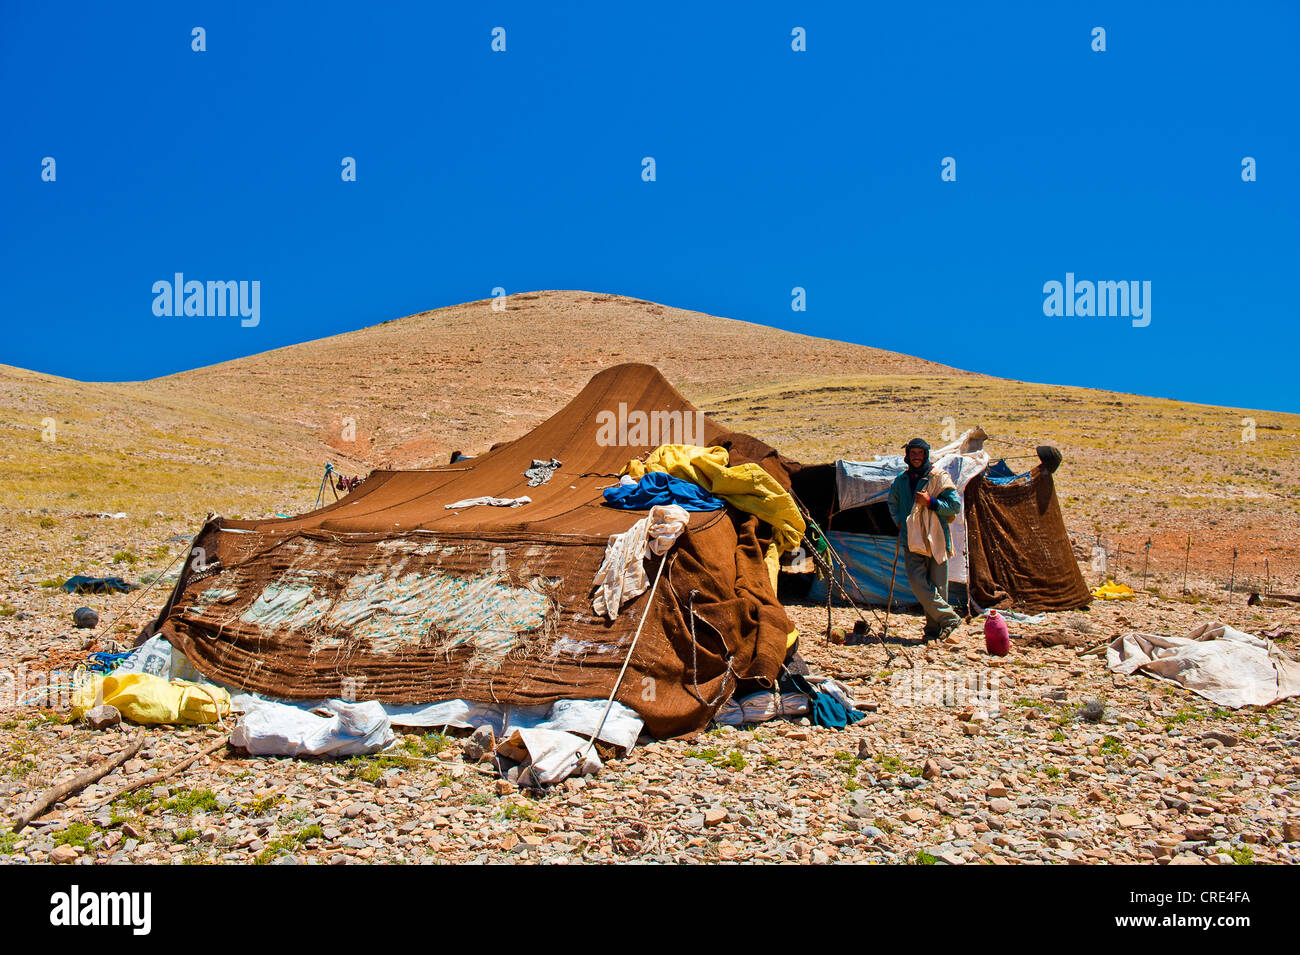 Man standing in front of his nomadic tent which has been patched several times, southern Morocco, Morocco, Africa Stock Photo